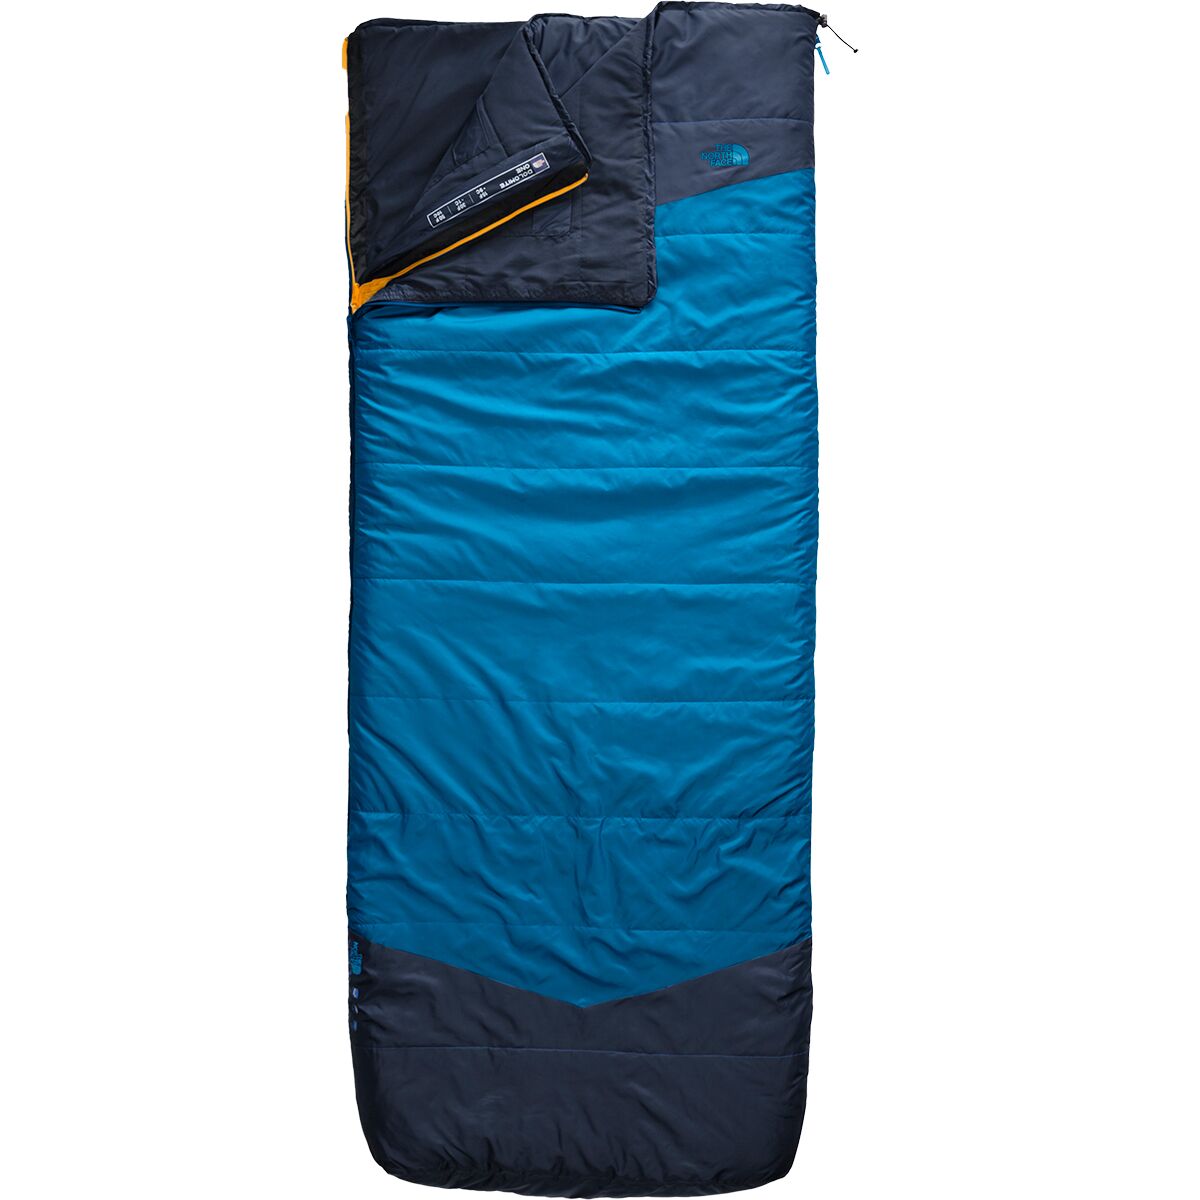 The North Face Dolomite One Sleeping Bag: 15F Synthetic